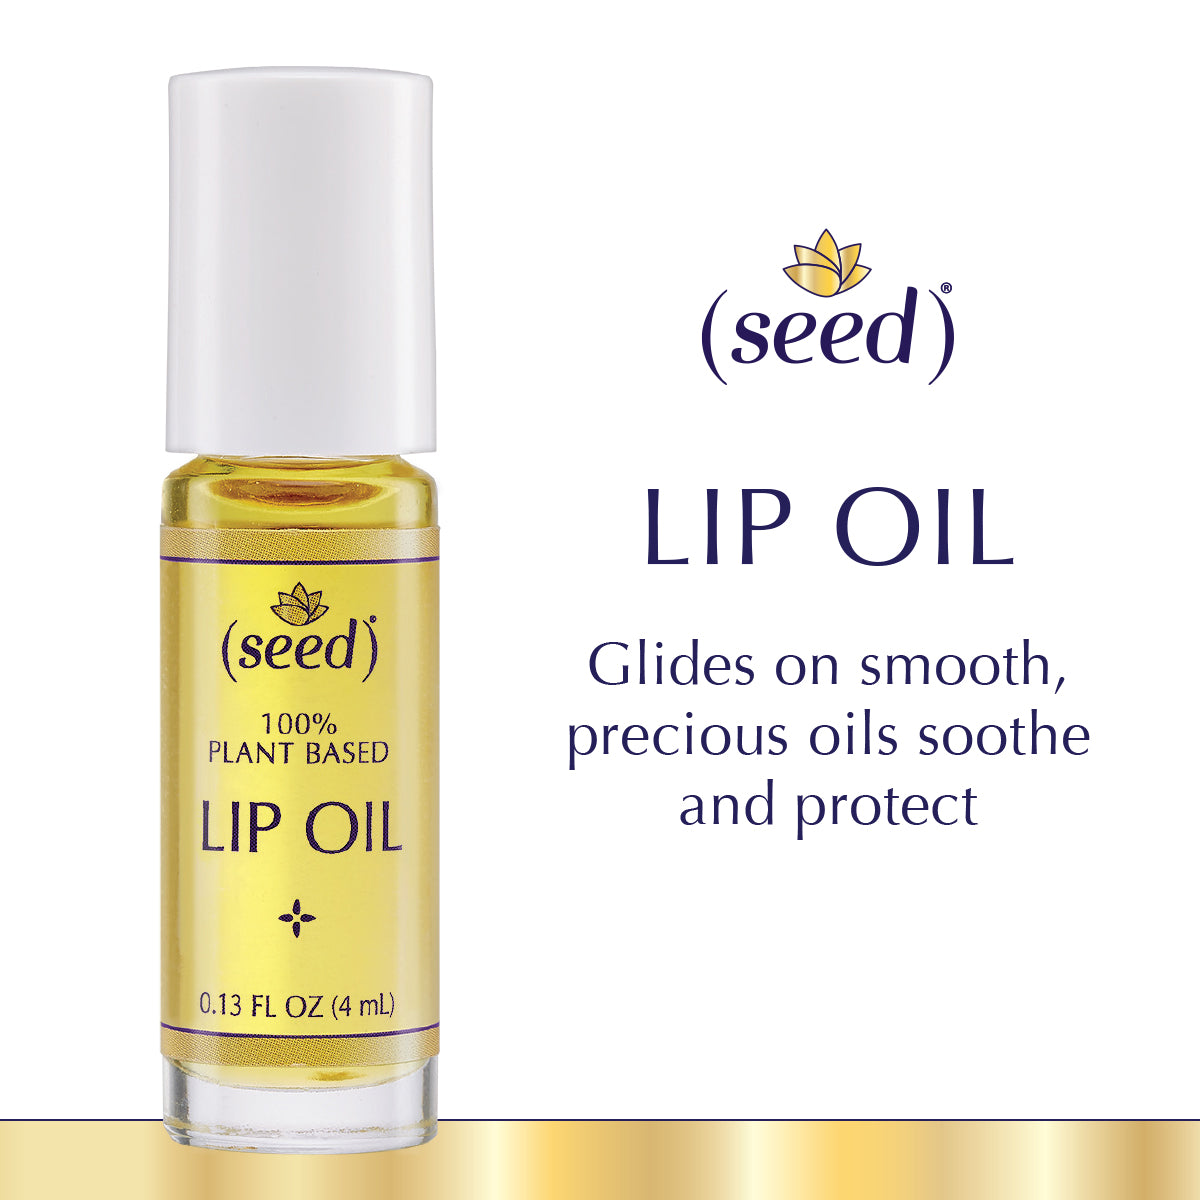 Seed Lip Oil glides on smooth, precious oils soothe and protect